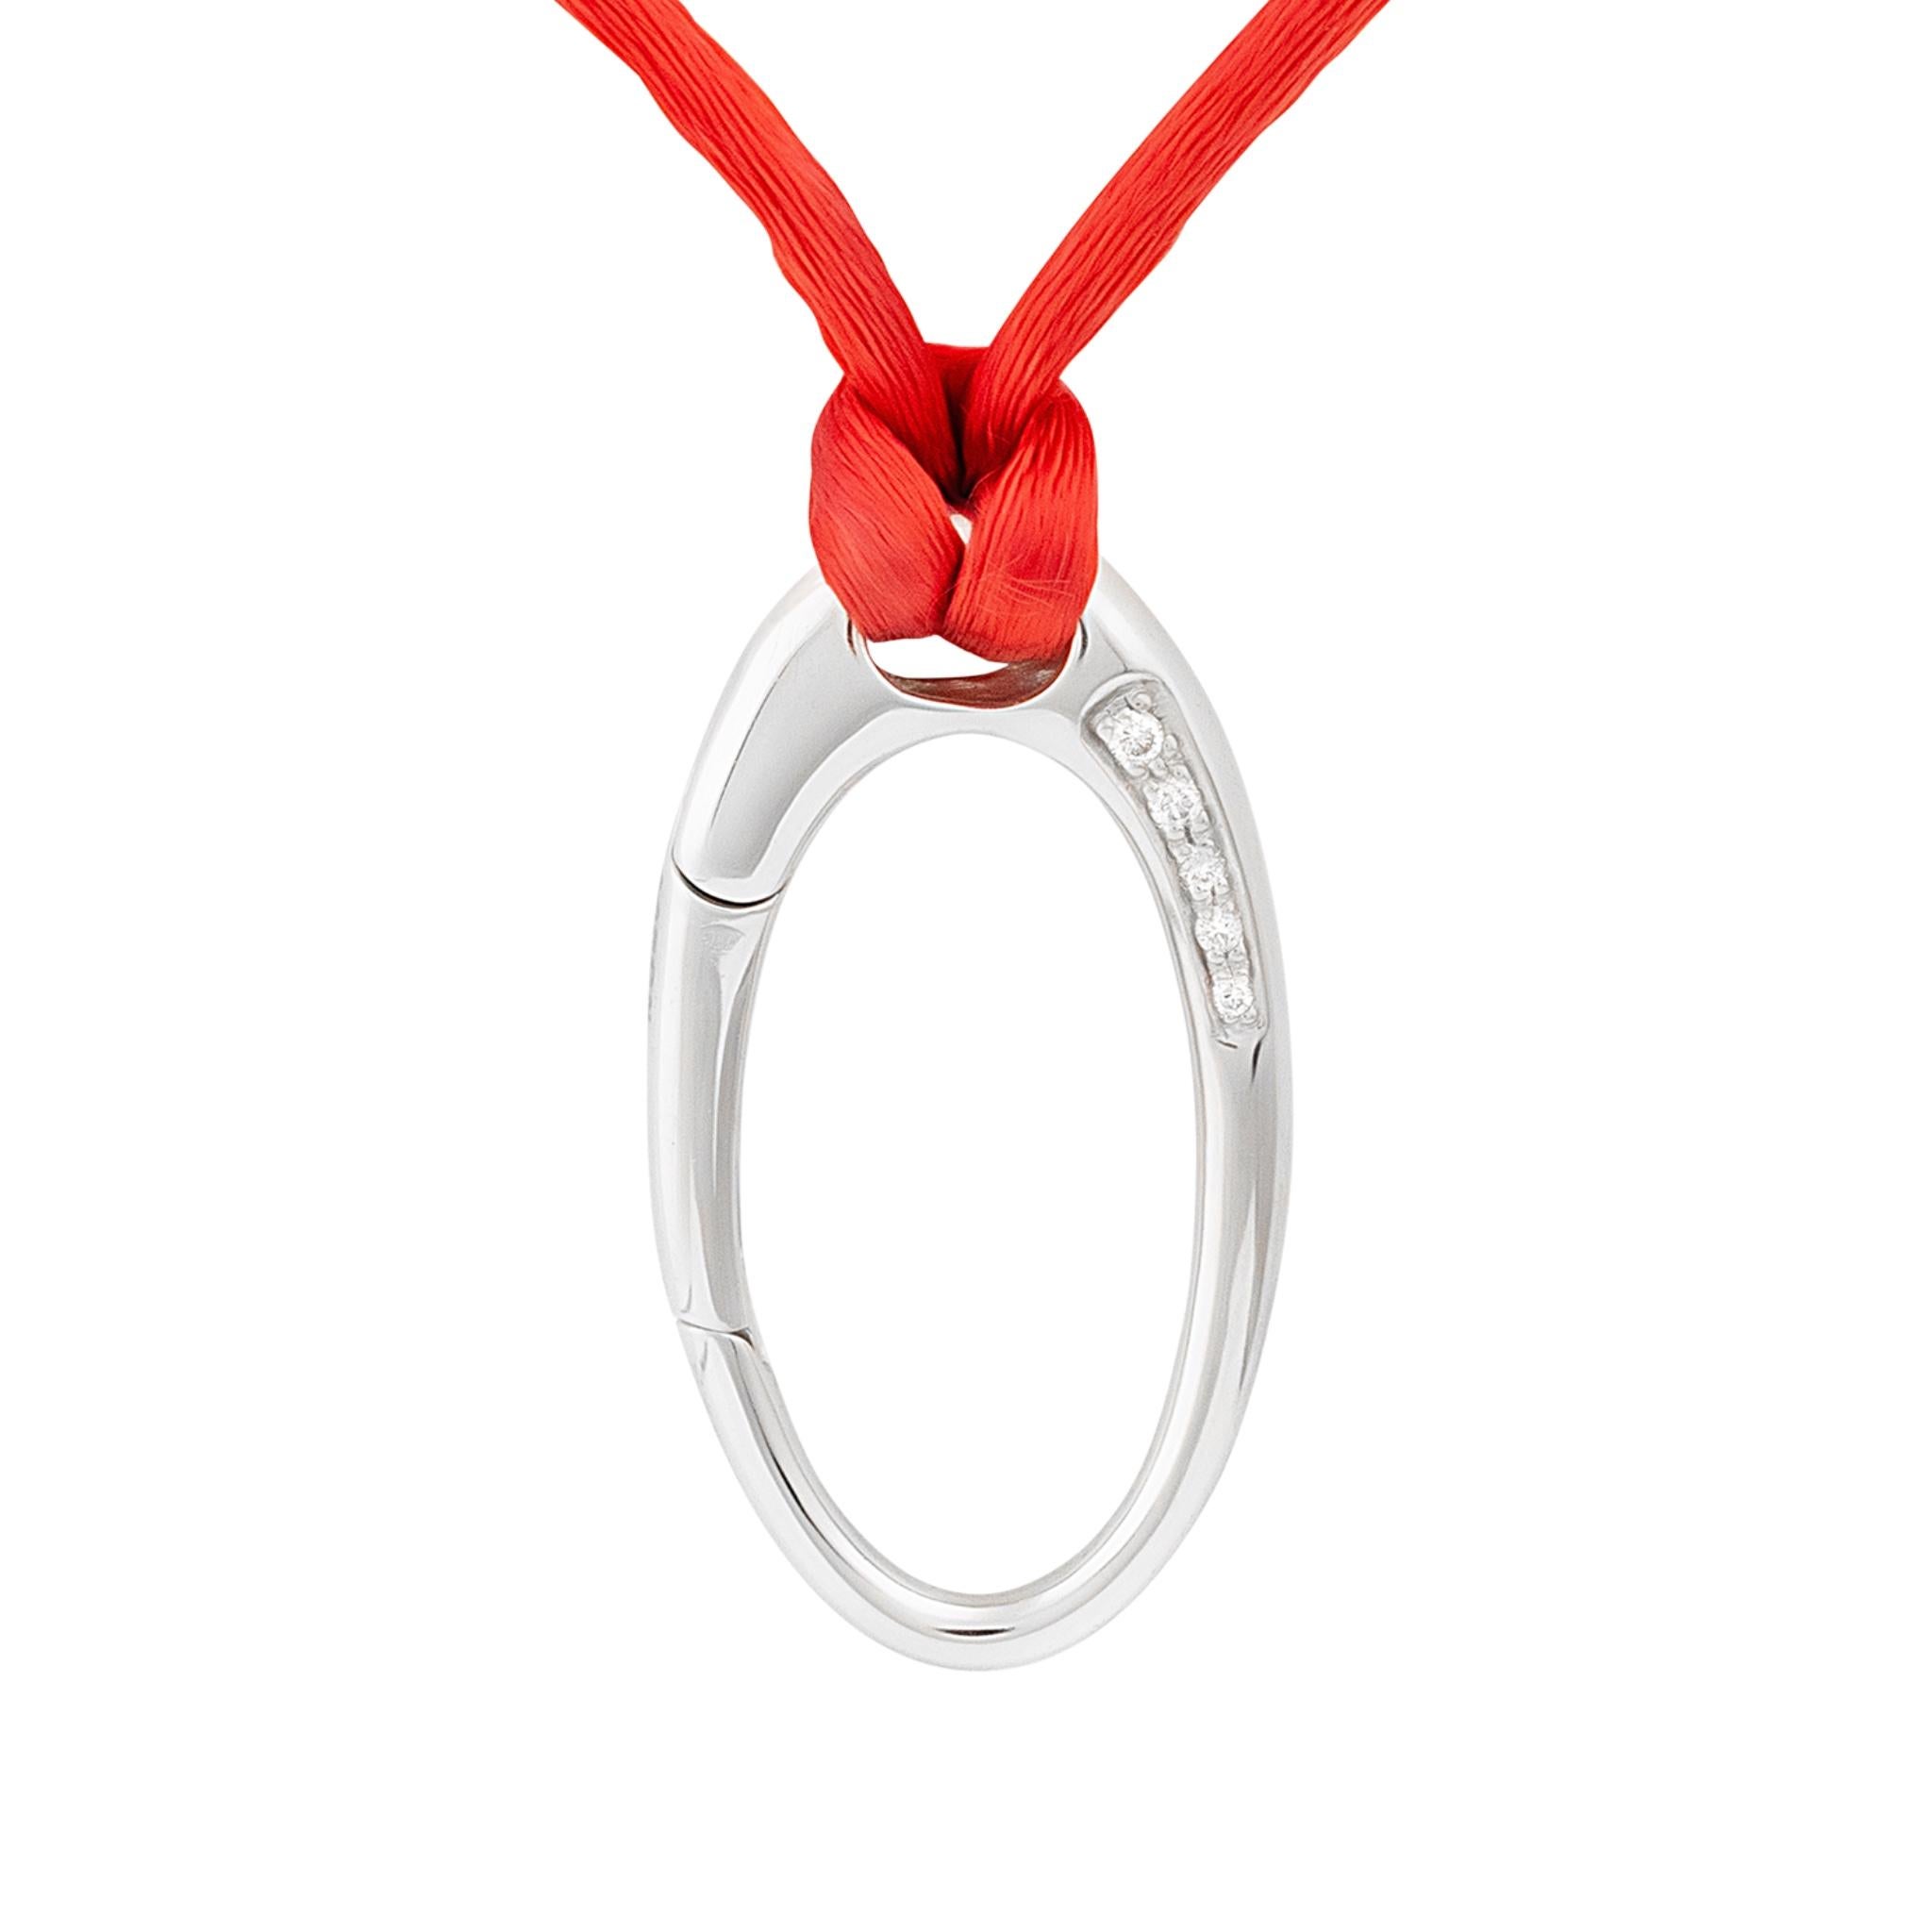 Red Stin Pendant Necklace
Diamond: 0.25ctw
Red Stin Necklace
Reference number: ABS01107